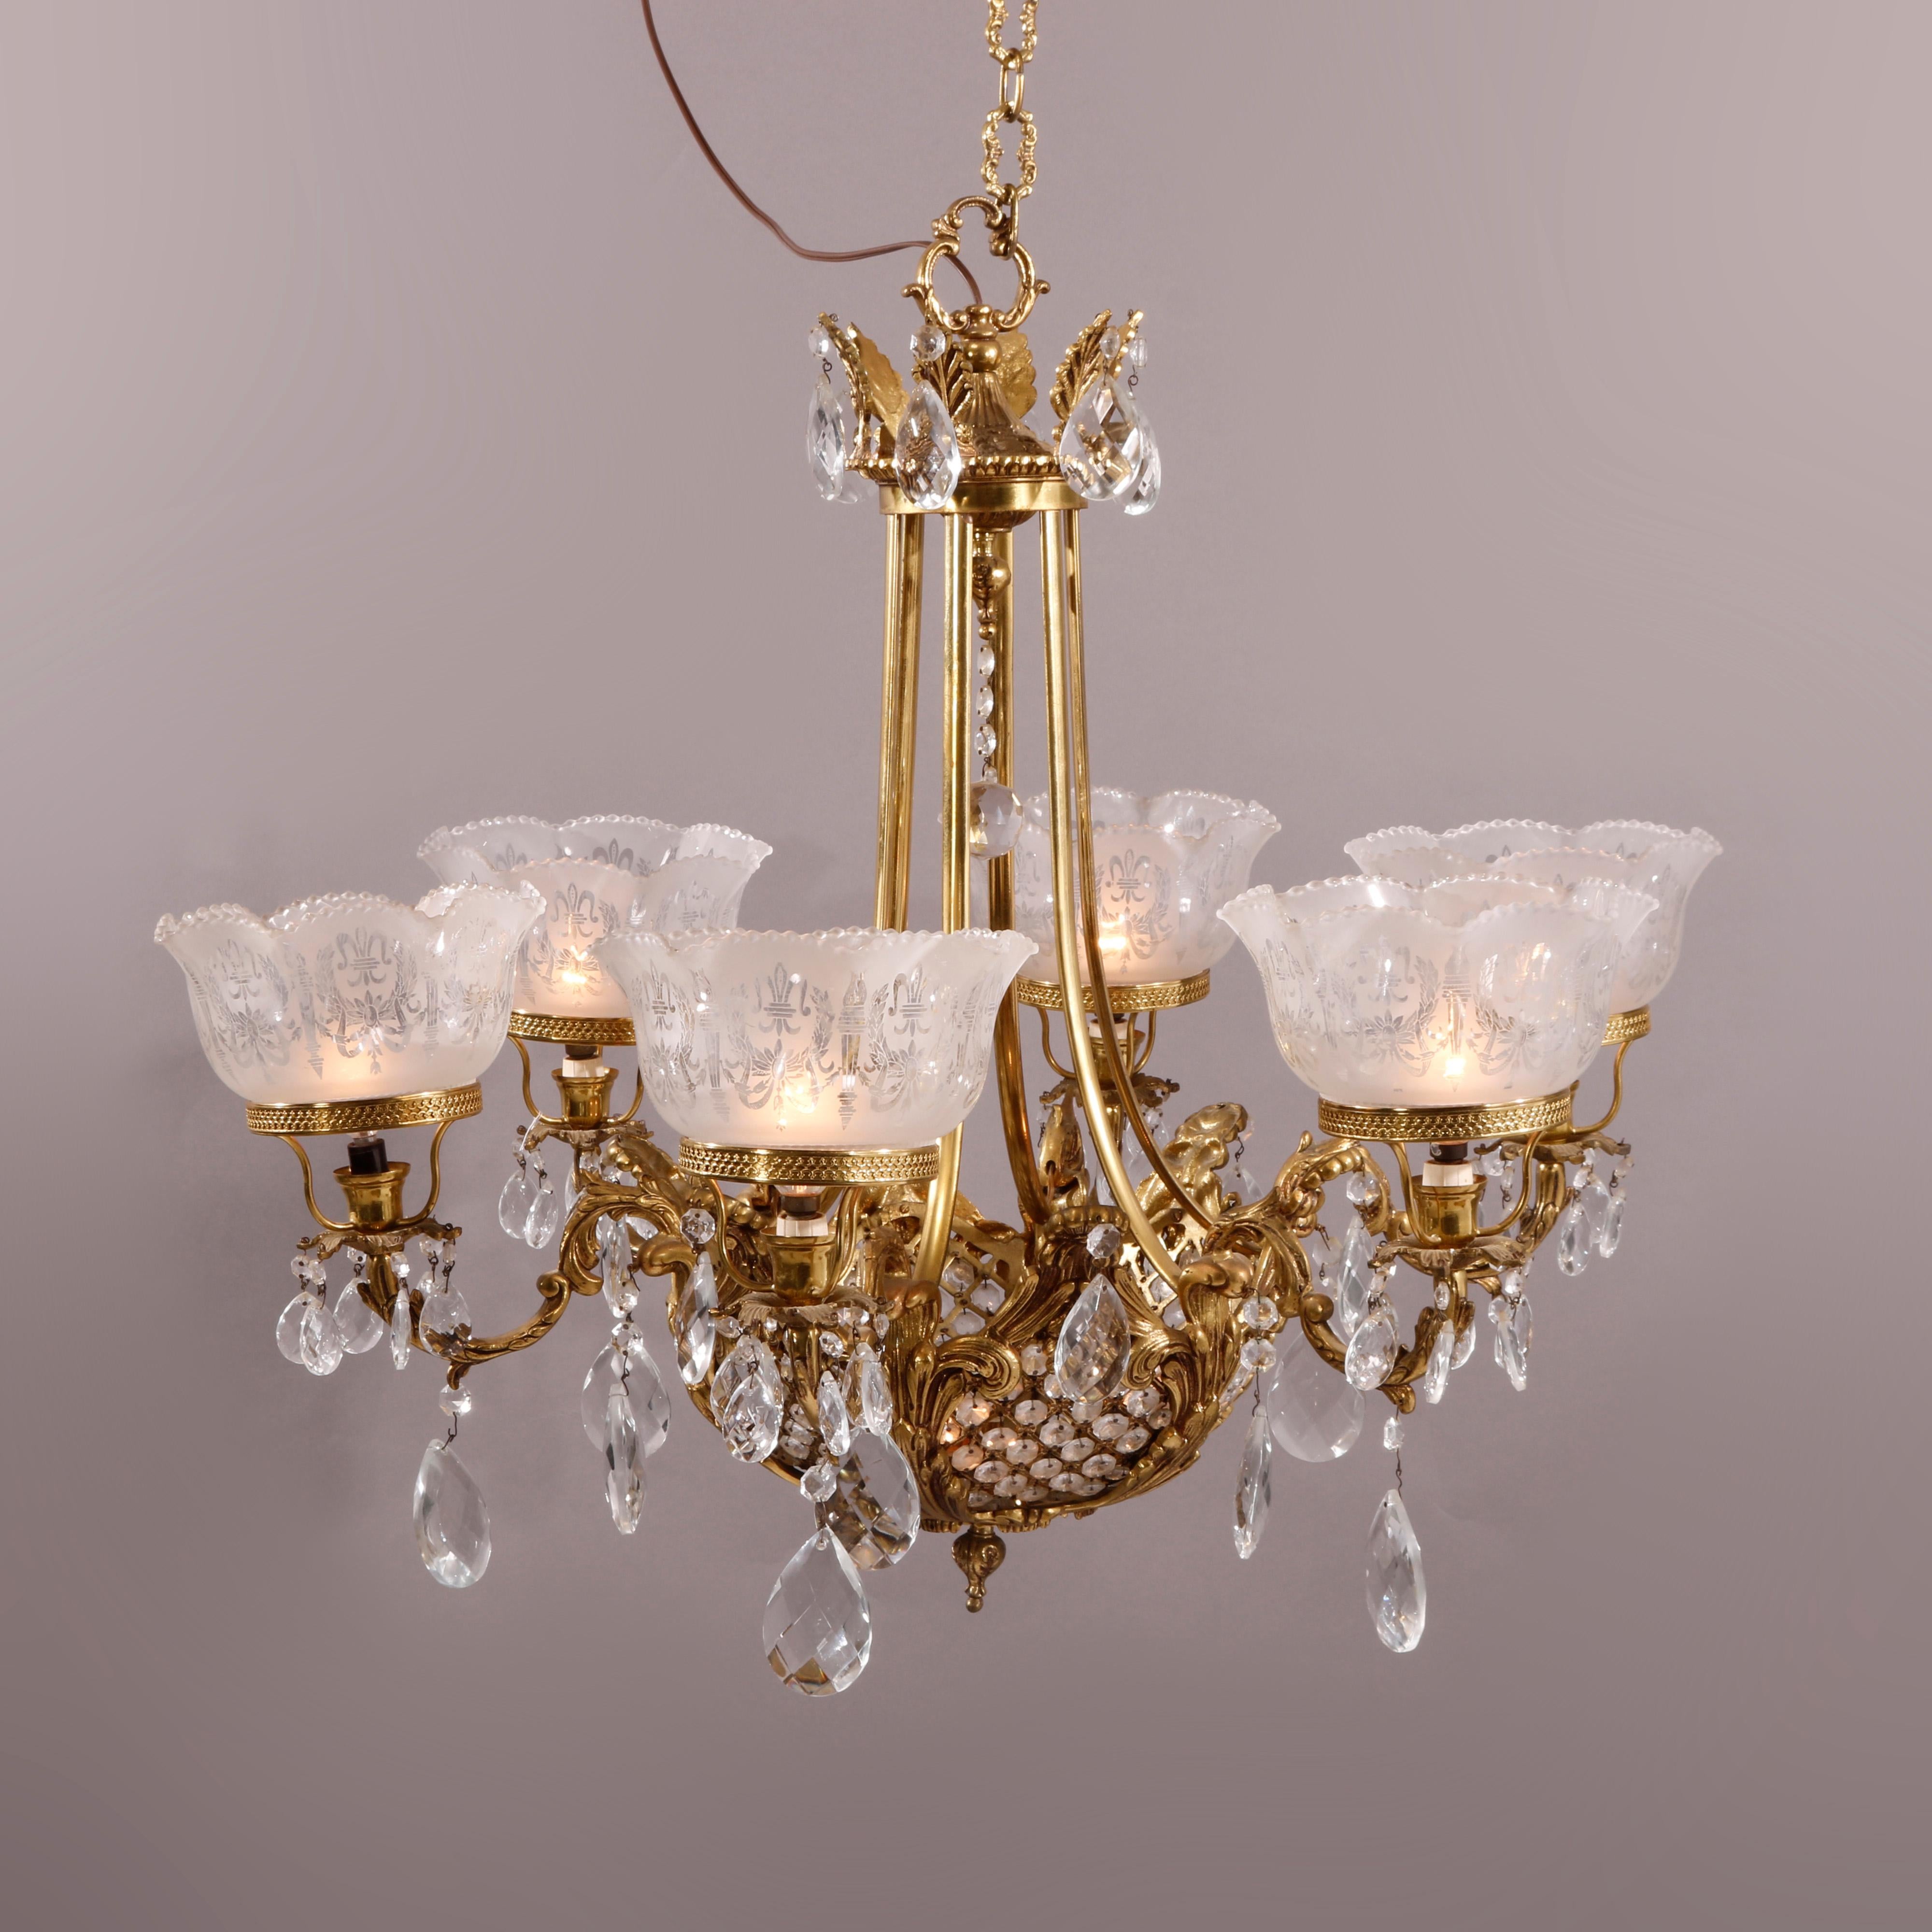 A French style chandelier offers bronze frame with central basket weave bowl having five scroll form arms terminating in candle lights with etched frosted glass shades, cast foliate elements and cut crystals throughout, 20th century

Measures -